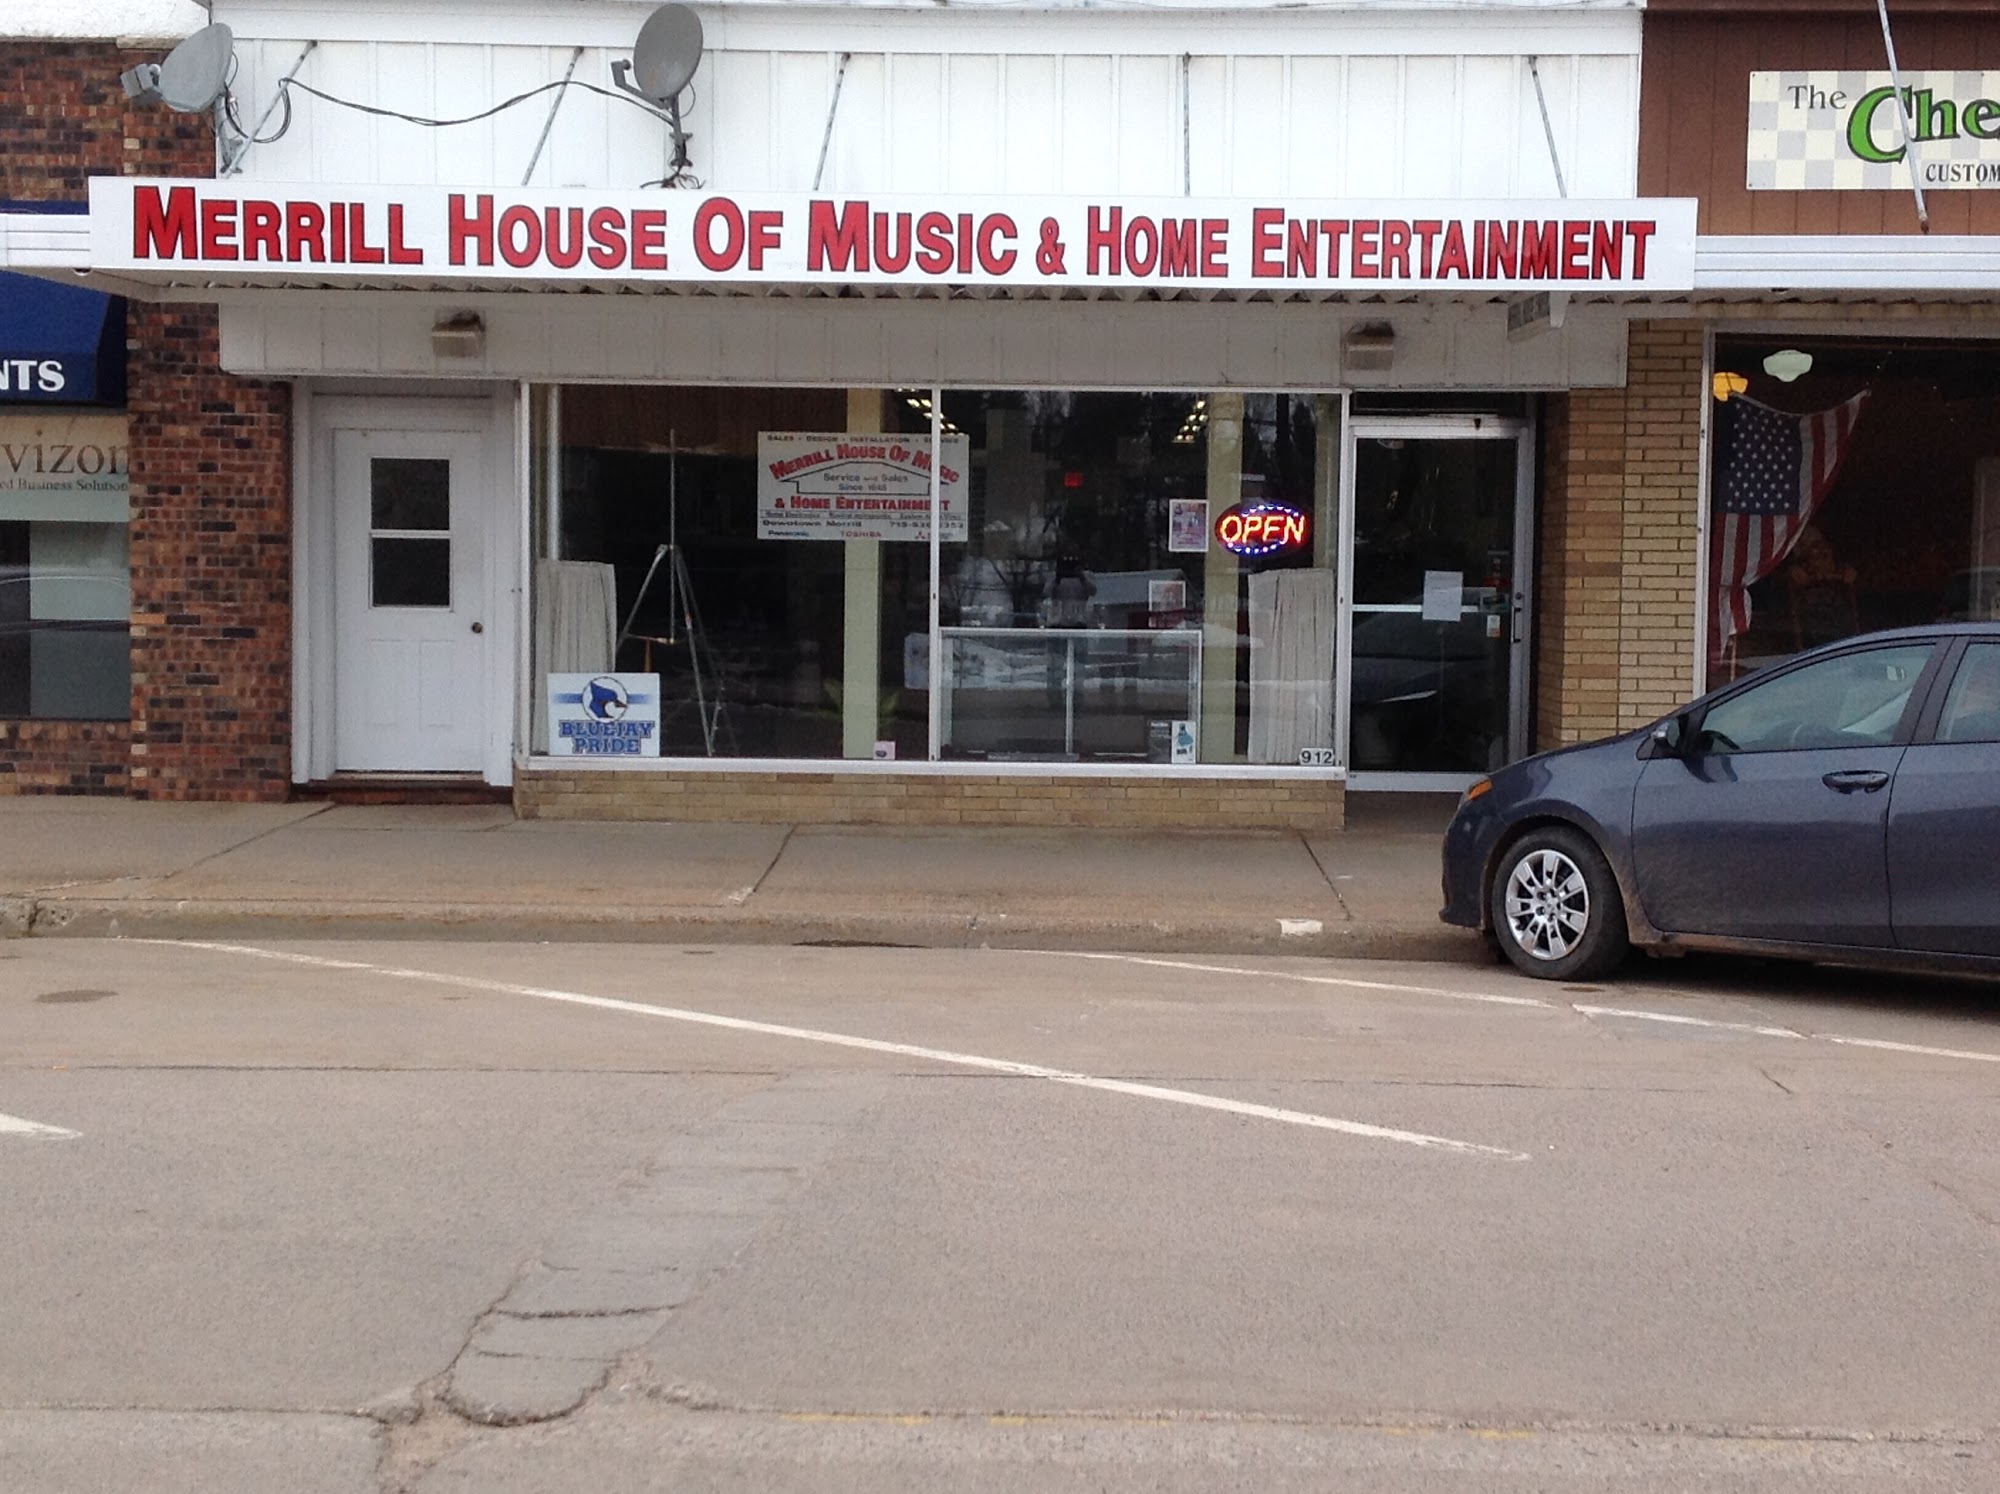 Merrill House Of Music & Home Entertainment